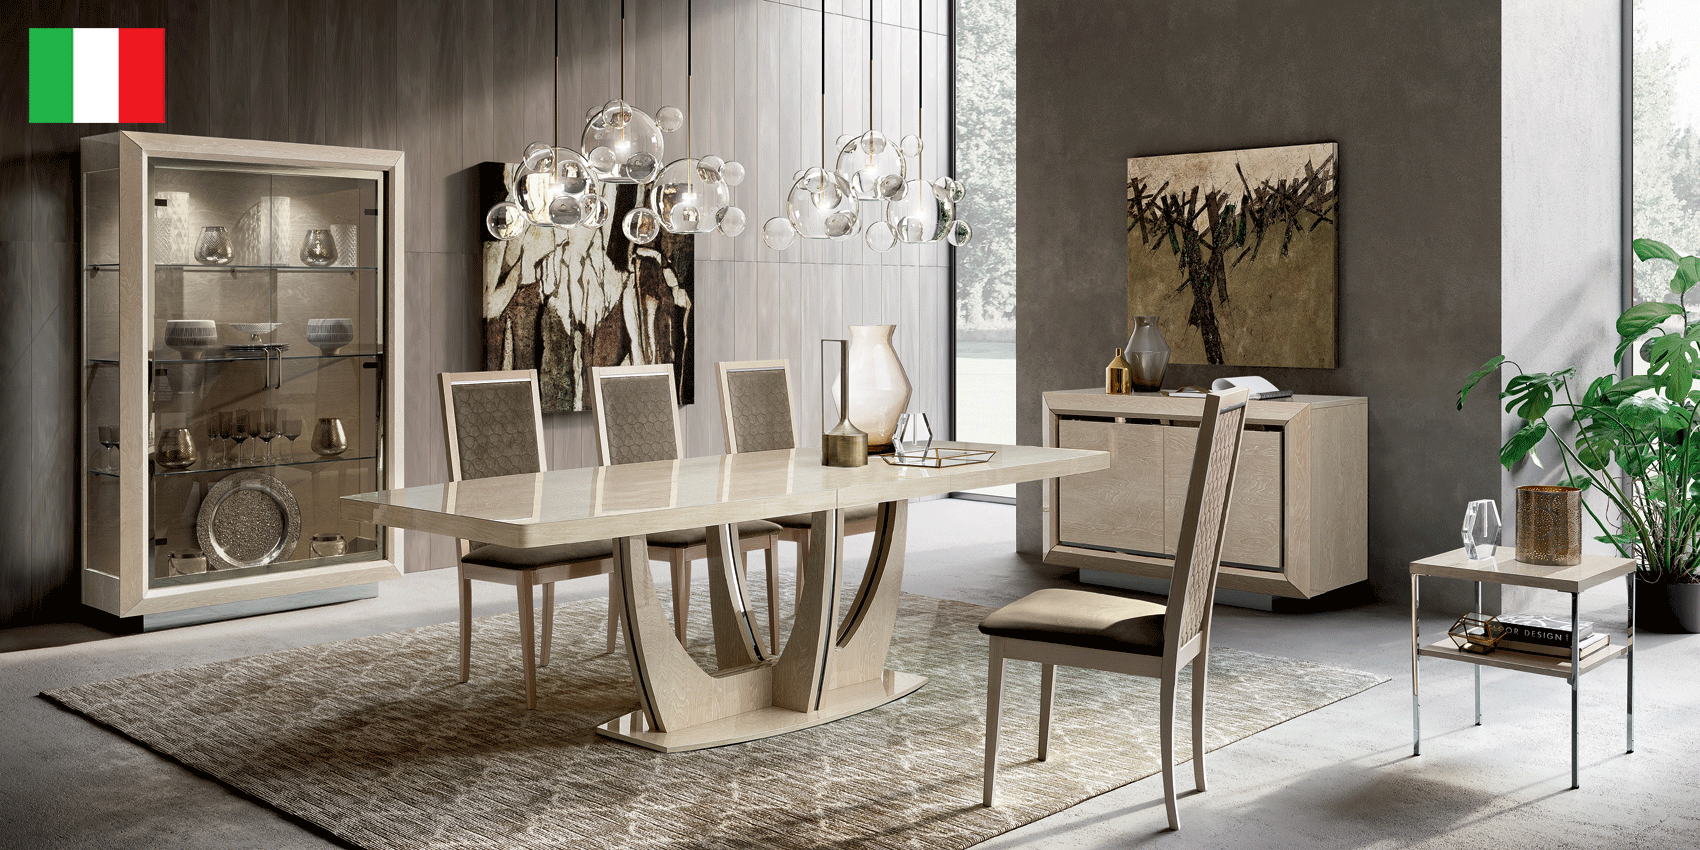 Dining Room Furniture Marble-Look Tables Elite Dining Ivory with Ambra “Rombi” Chairs